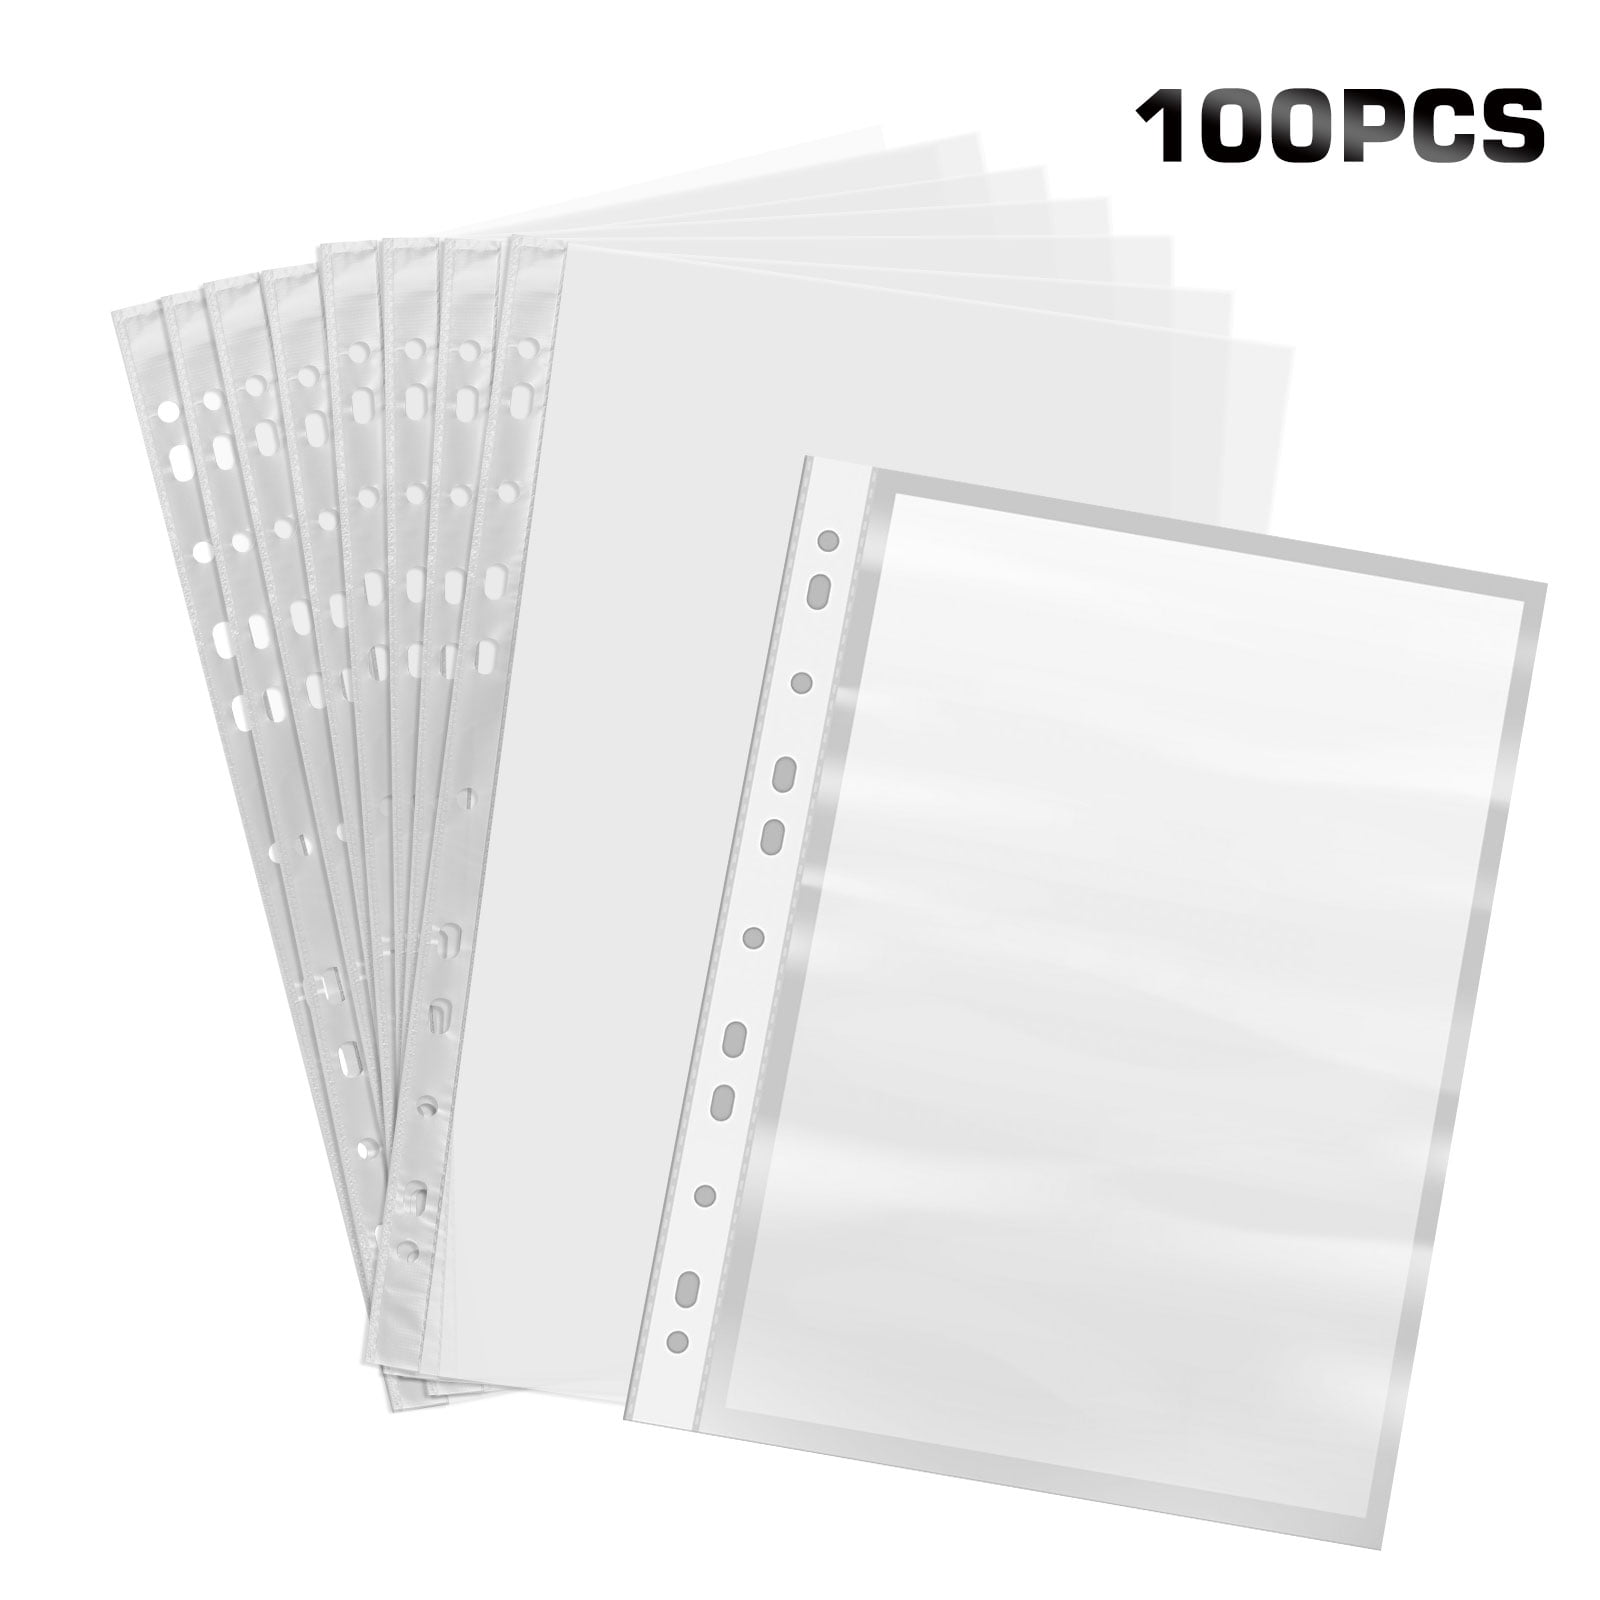 For A4 Paper 100x Sleeves Clear Sheet Page Protector Document Office Ring Binder 